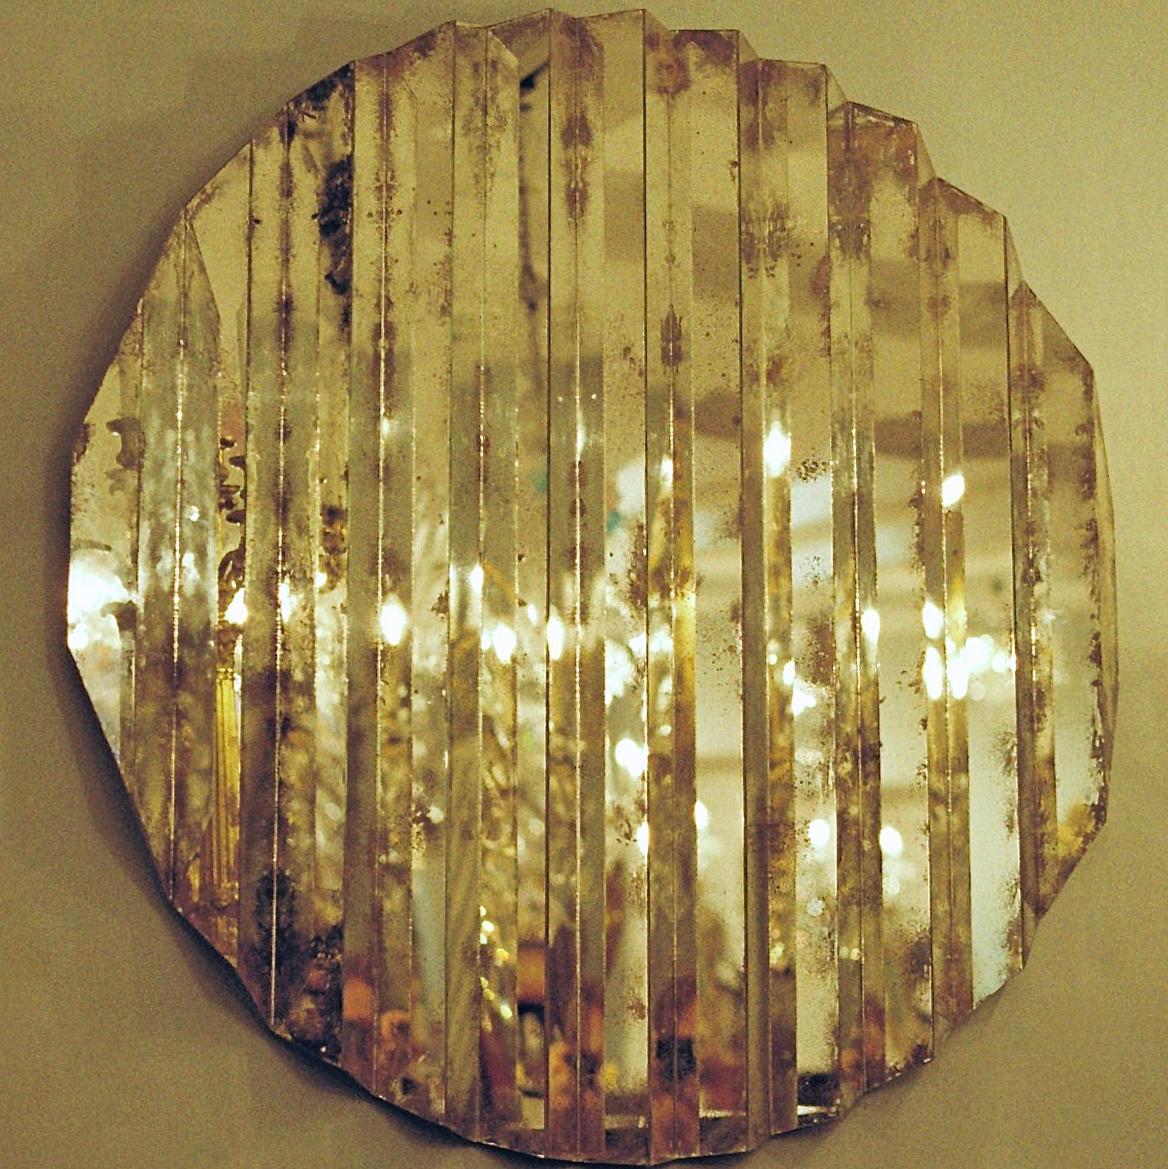 Cornelia Laufer
Pleated mirror, 2018
Aged mirror panes on wood
Measures: Diameter 90 cm, depth 7 cm
One-of-a-kind piece, signed on the back.

Cornelia Laufer studied surface design and conservation of decorative surfaces at the The Sir John